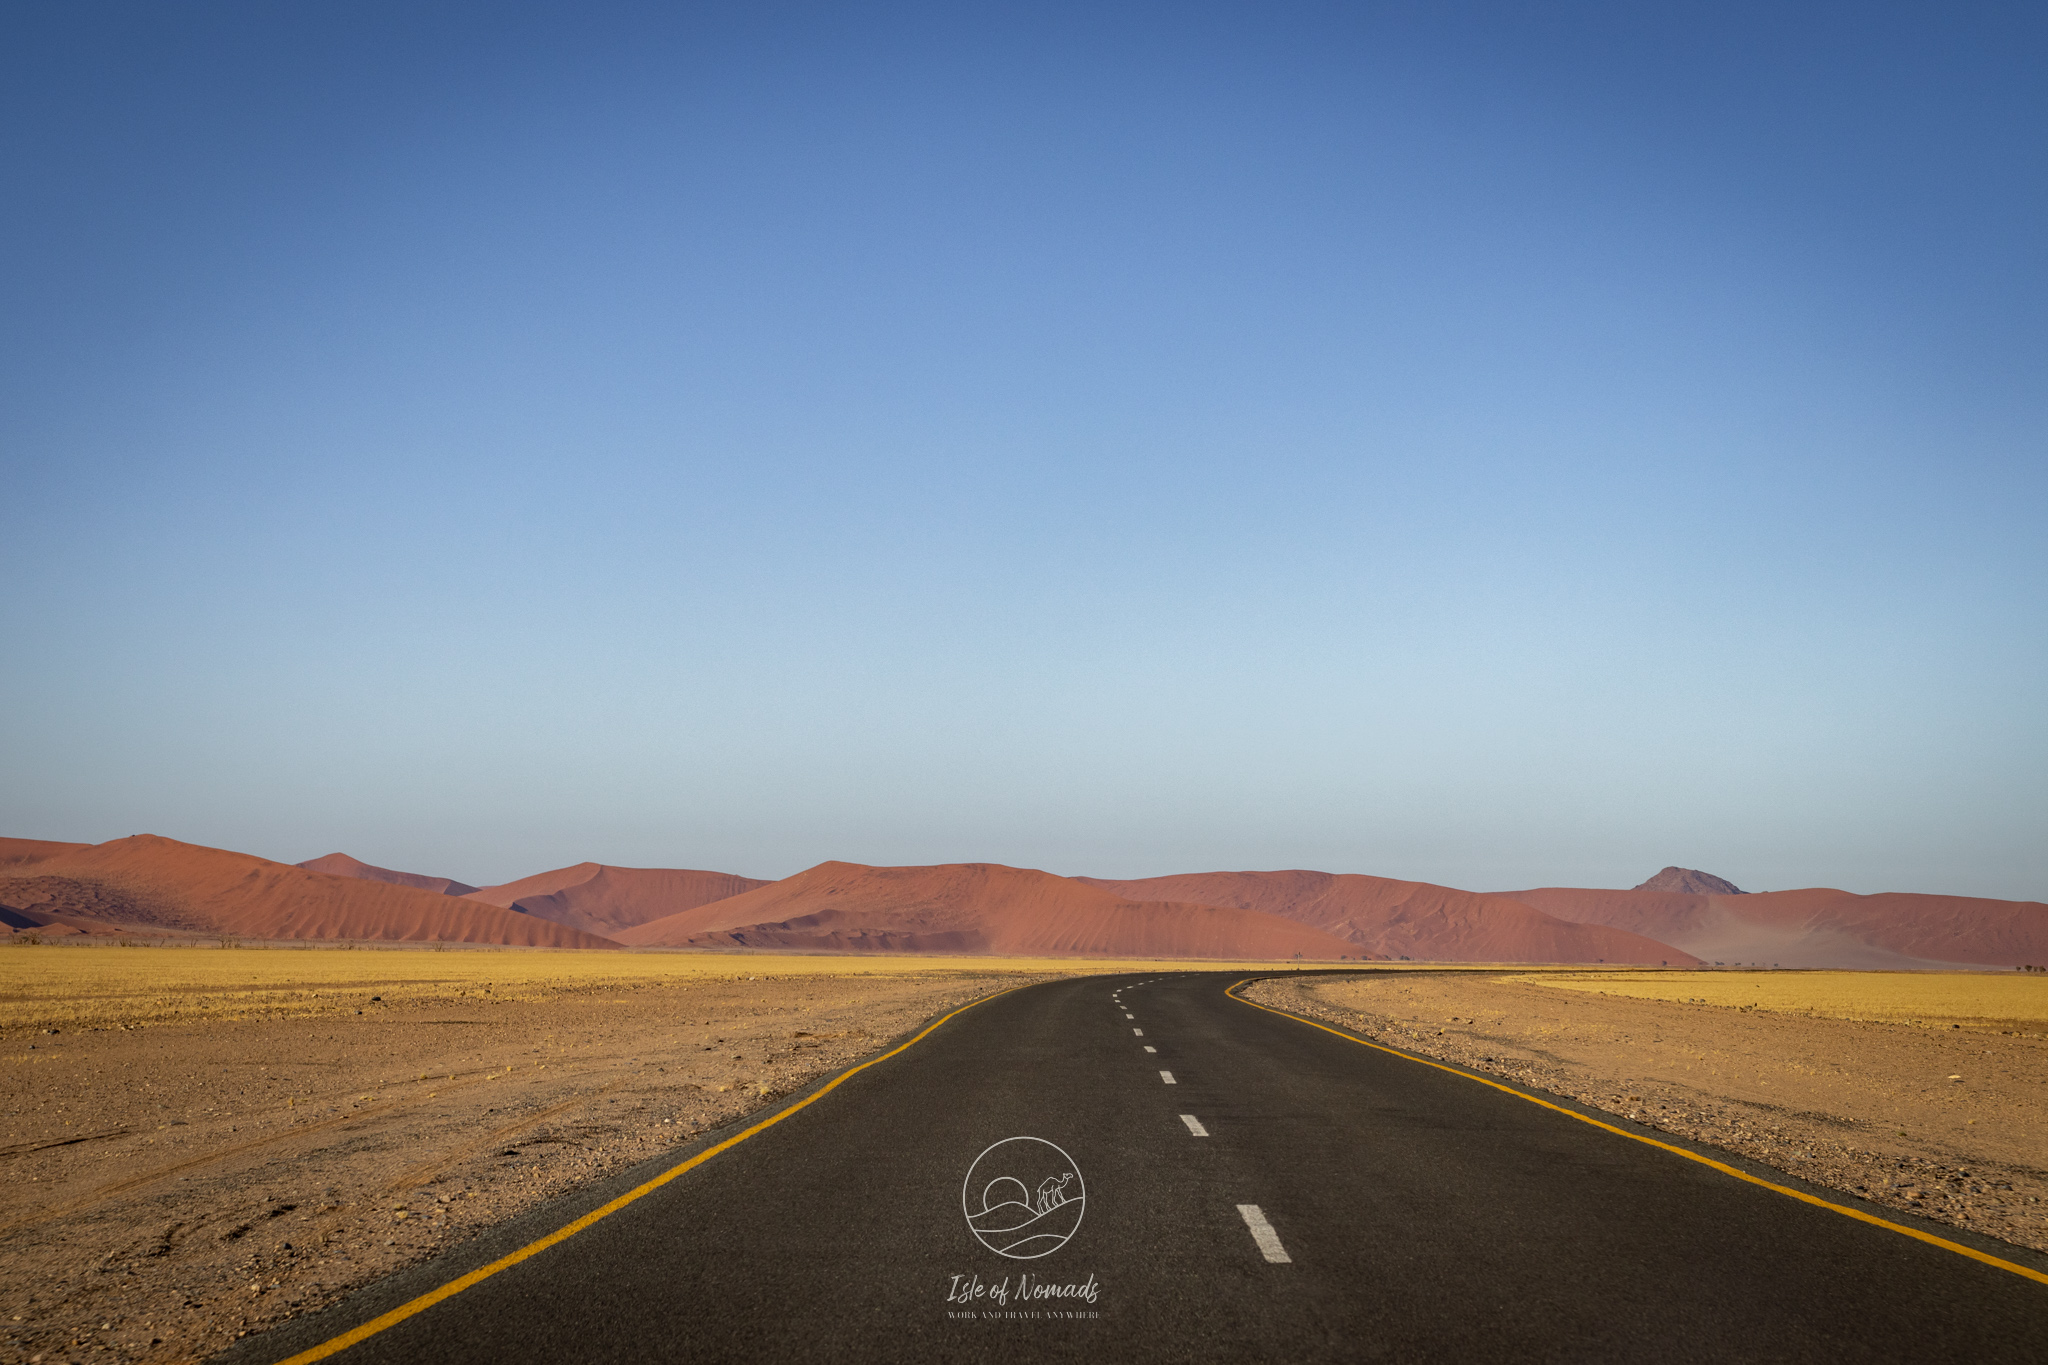 After crossing the border from South Africa to Namibia, much of the landscape will be different types of desert - all of them fascinating and beautiful though!